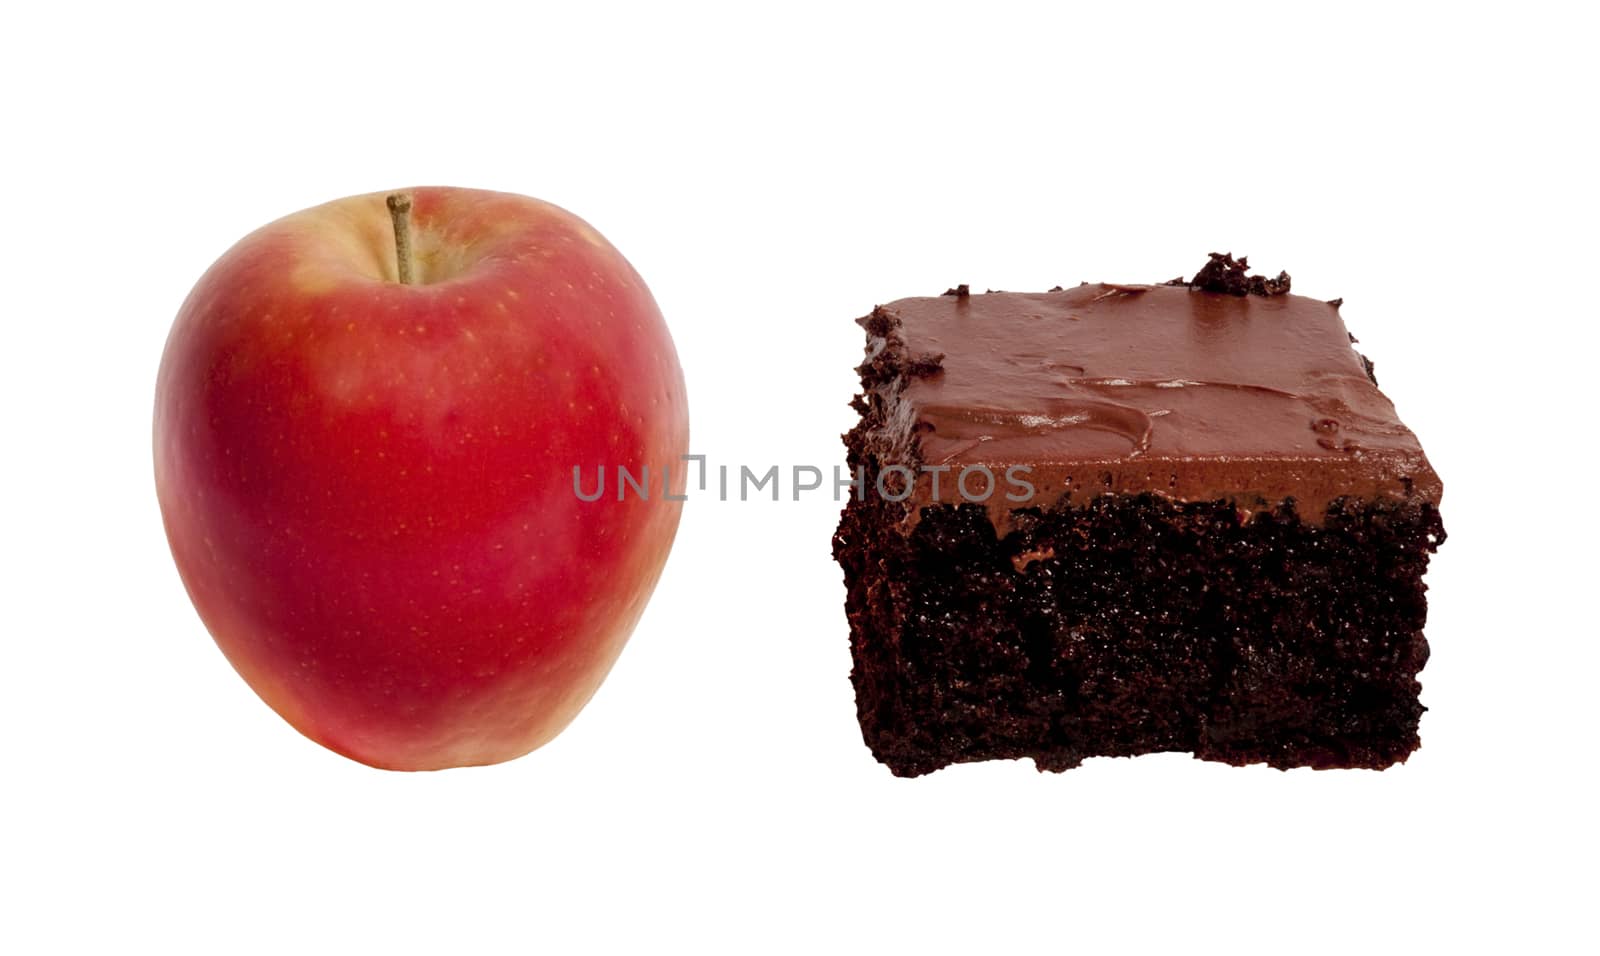 Tough choice between healthy red apple or delicious chocolate cake.